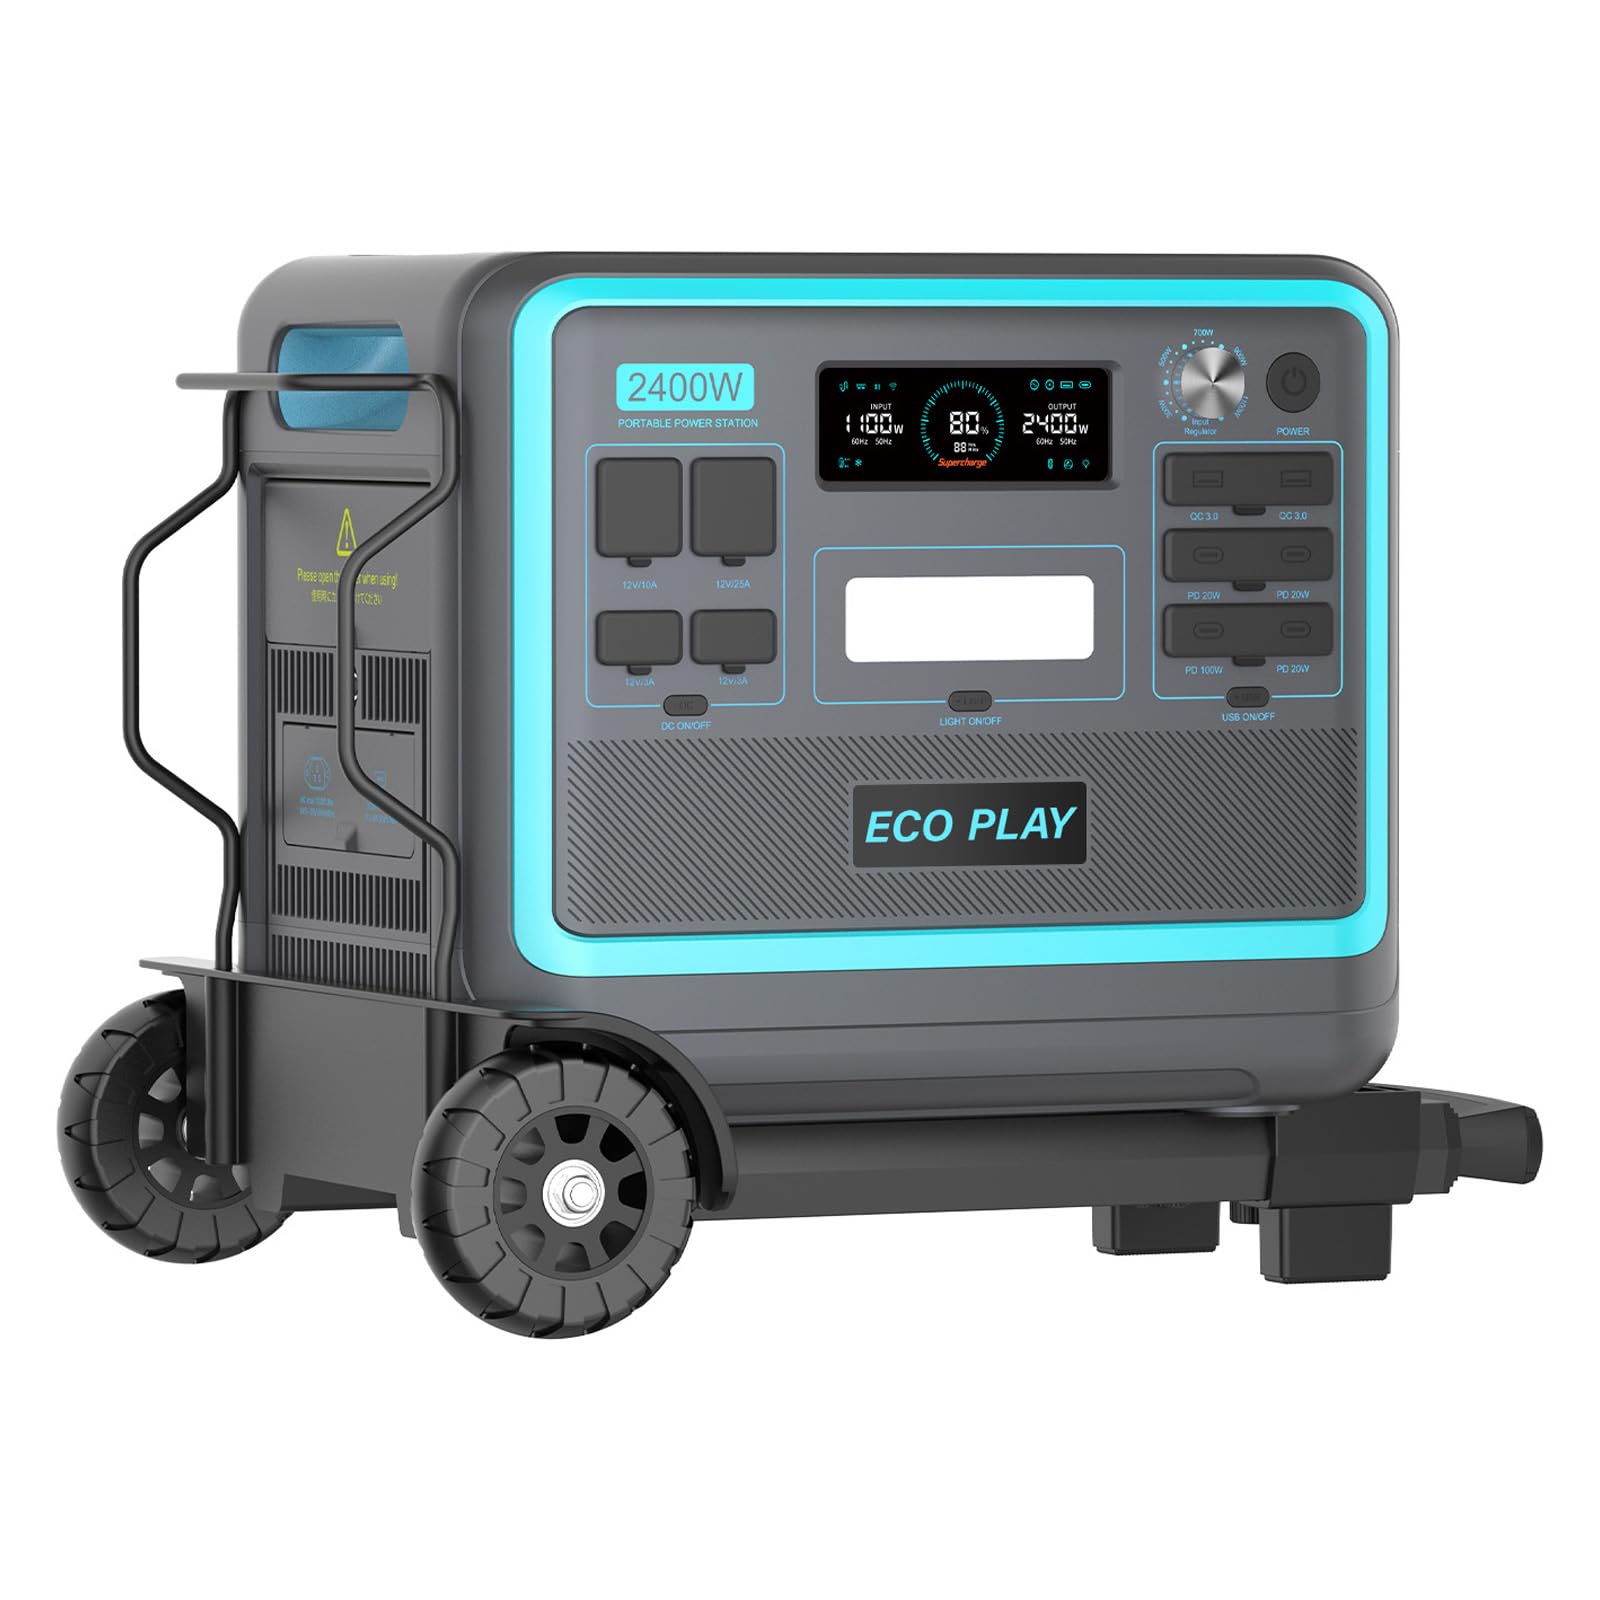 2400W Portable Power Station, 2048Wh LiFePO4 Battery Backup, 1.8H Fast Charging,16 Outputs